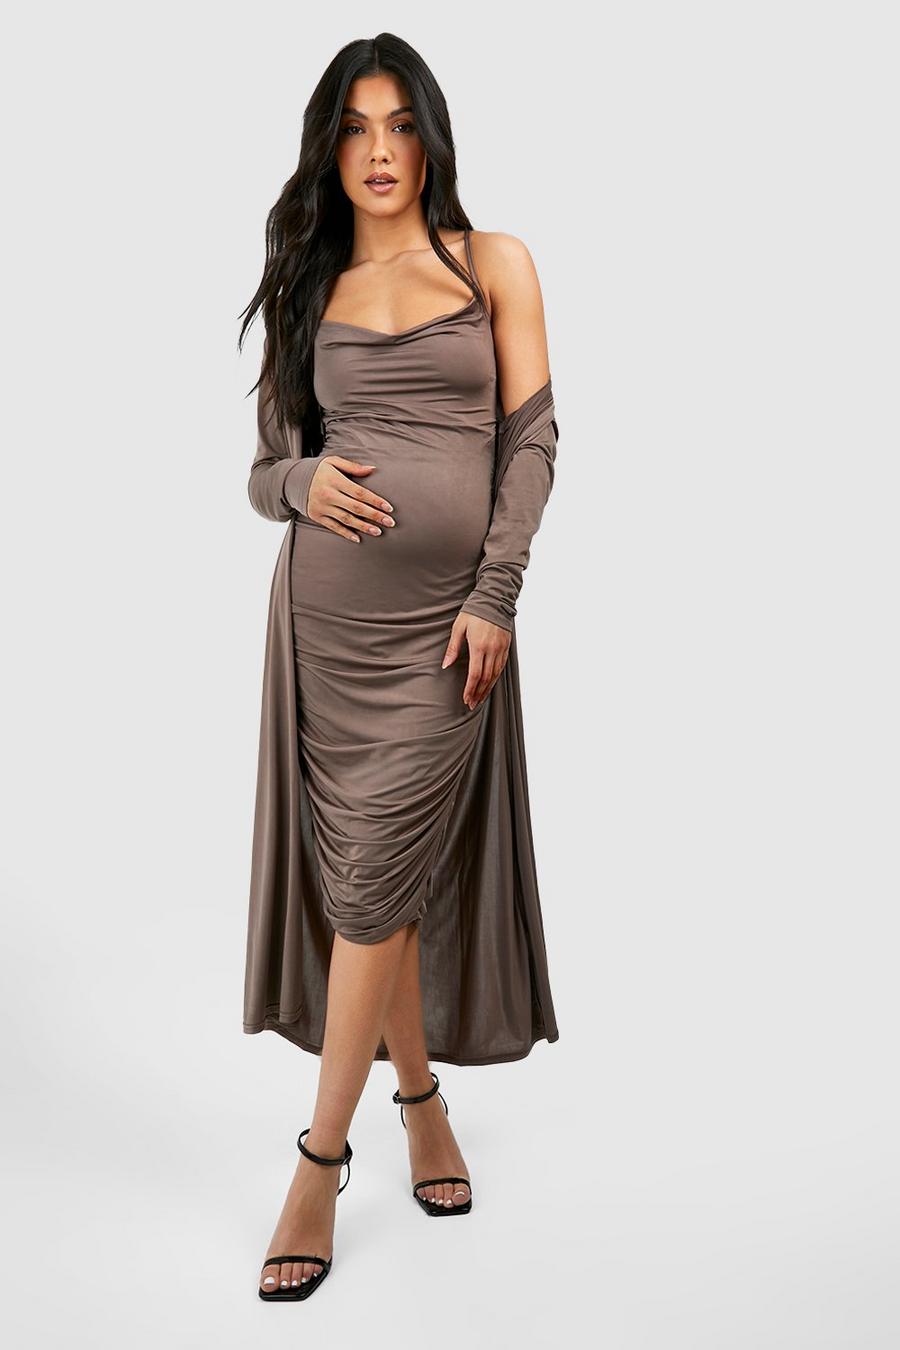 Baby Shower Dresses for Mom | Baby Shower Outfit Ideas | boohoo USA